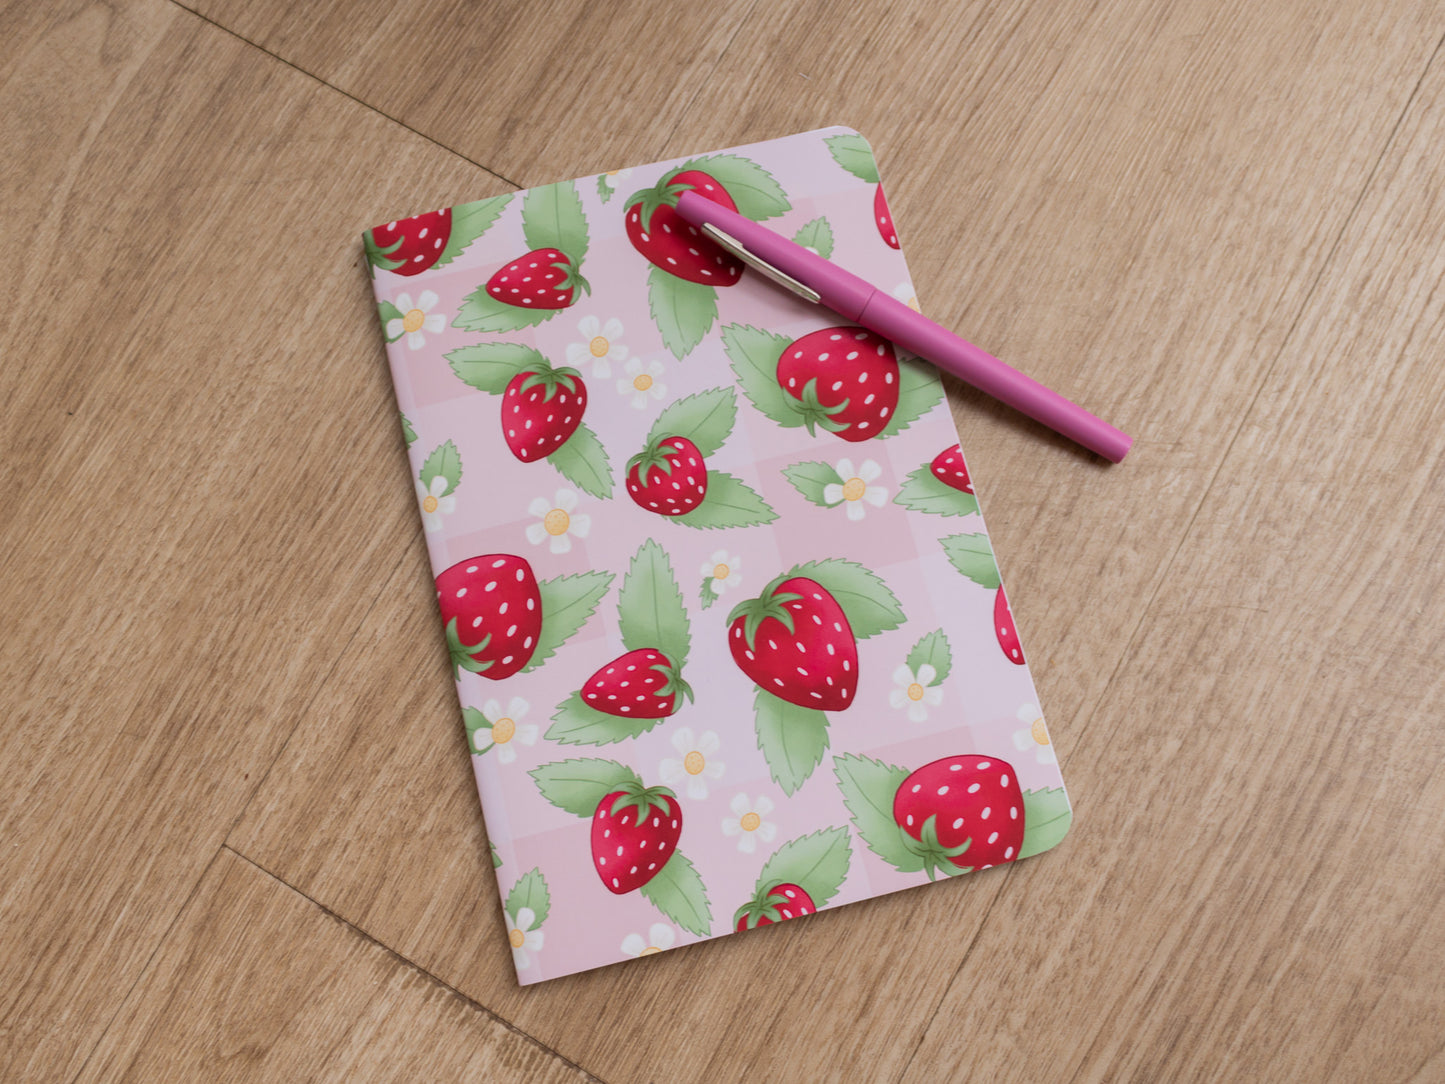 A5 Handmade Notebook with Strawberry Design